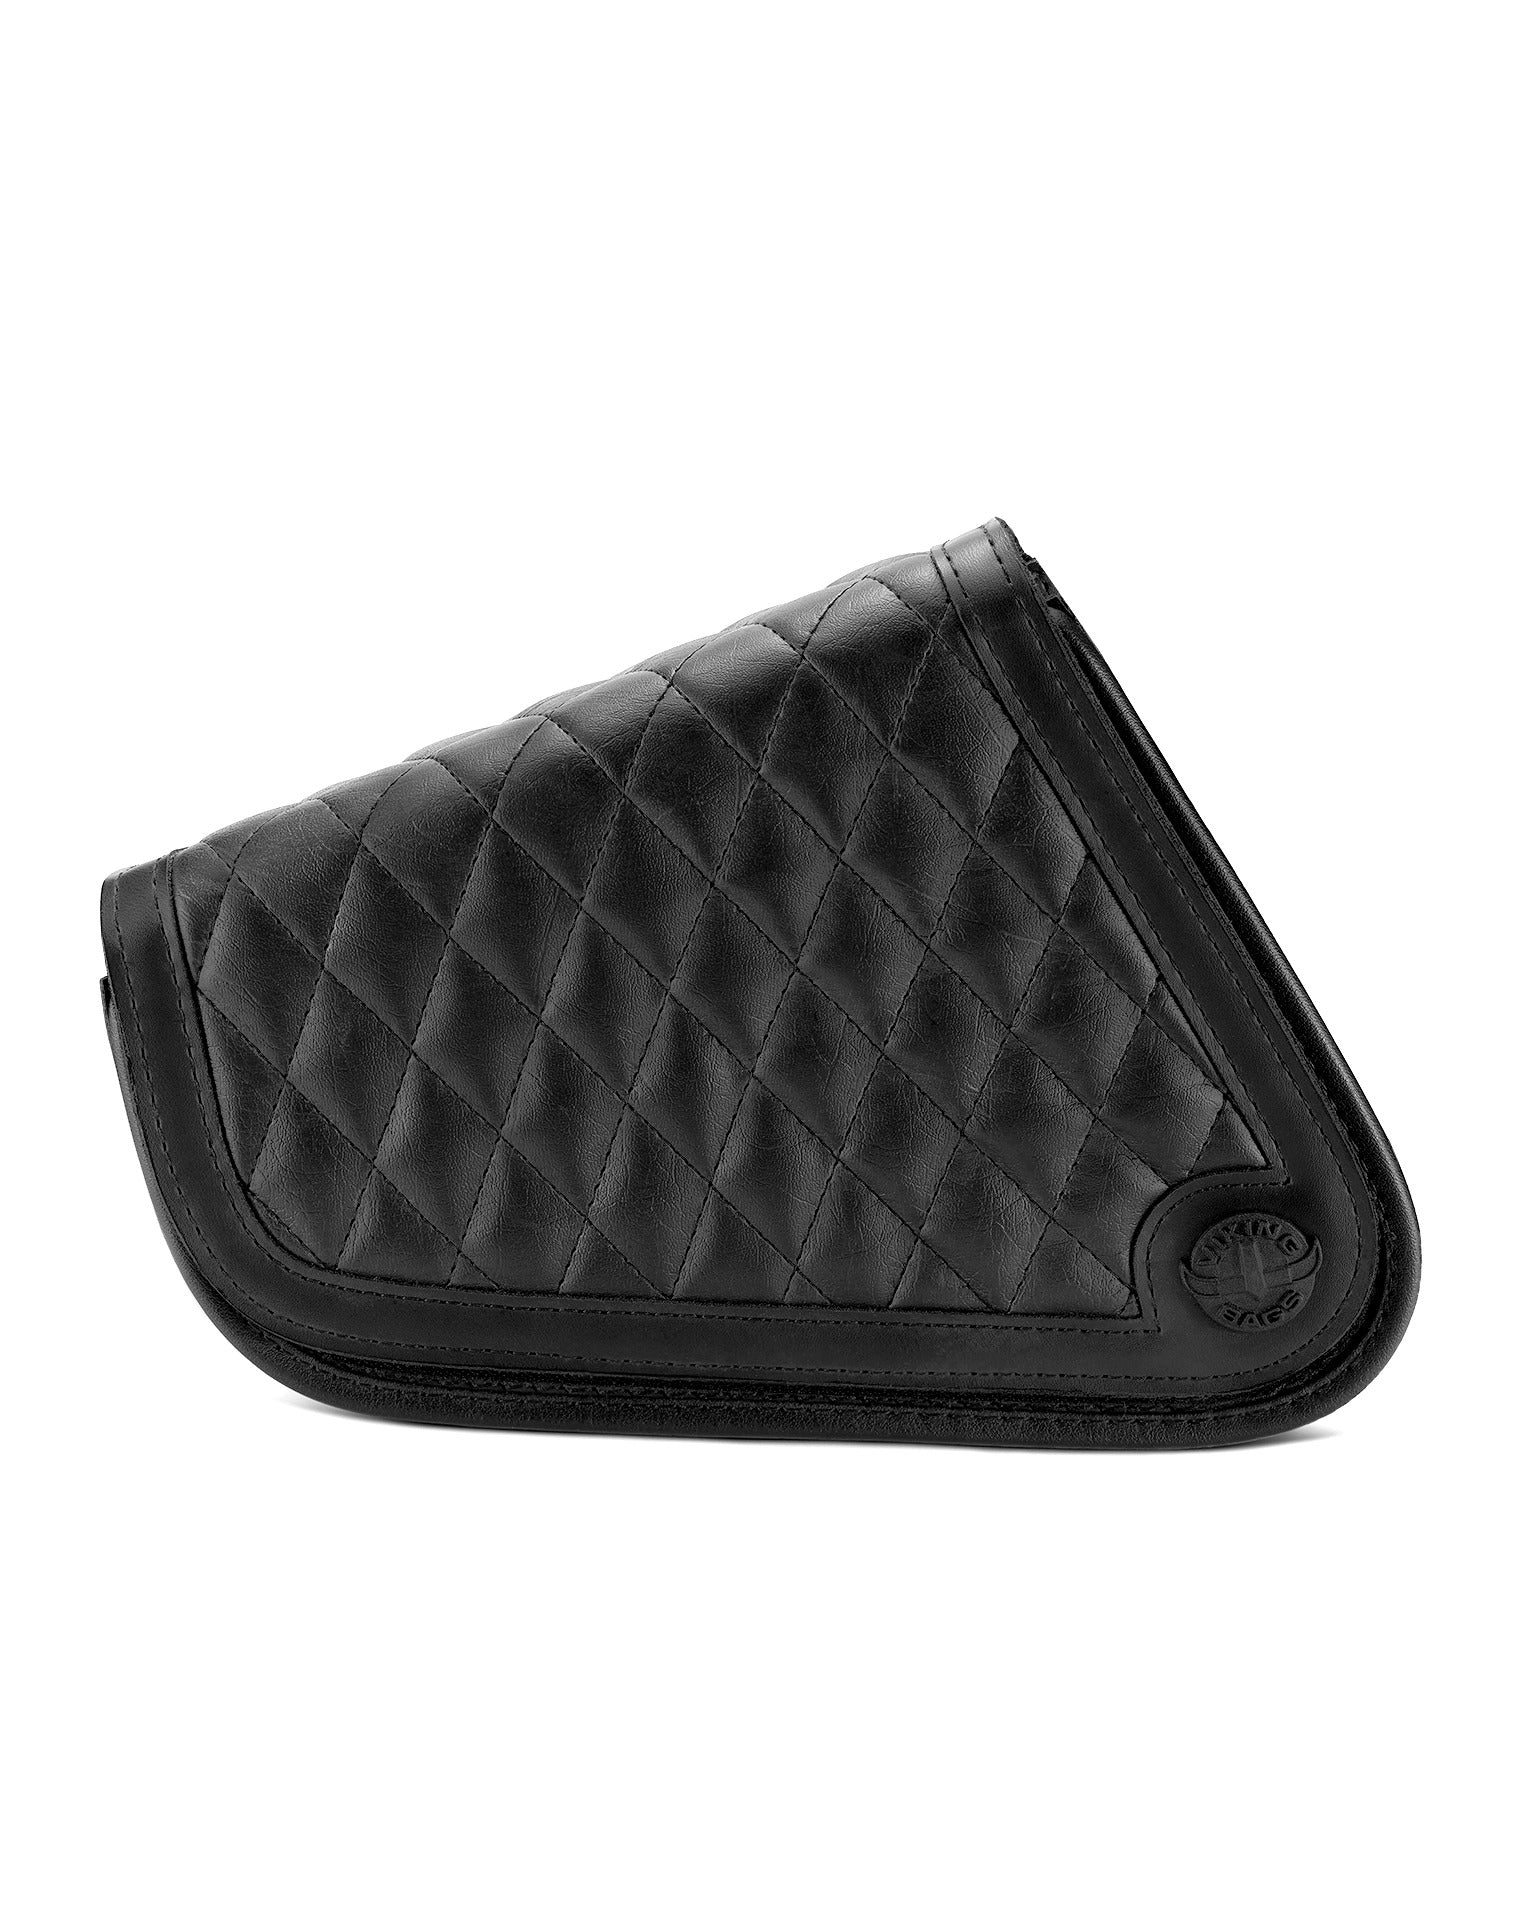 Viking Iron Born Diamond Stitch Leather Motorcycle Swing Arm Bag for Harley Davidson Sportster Front View